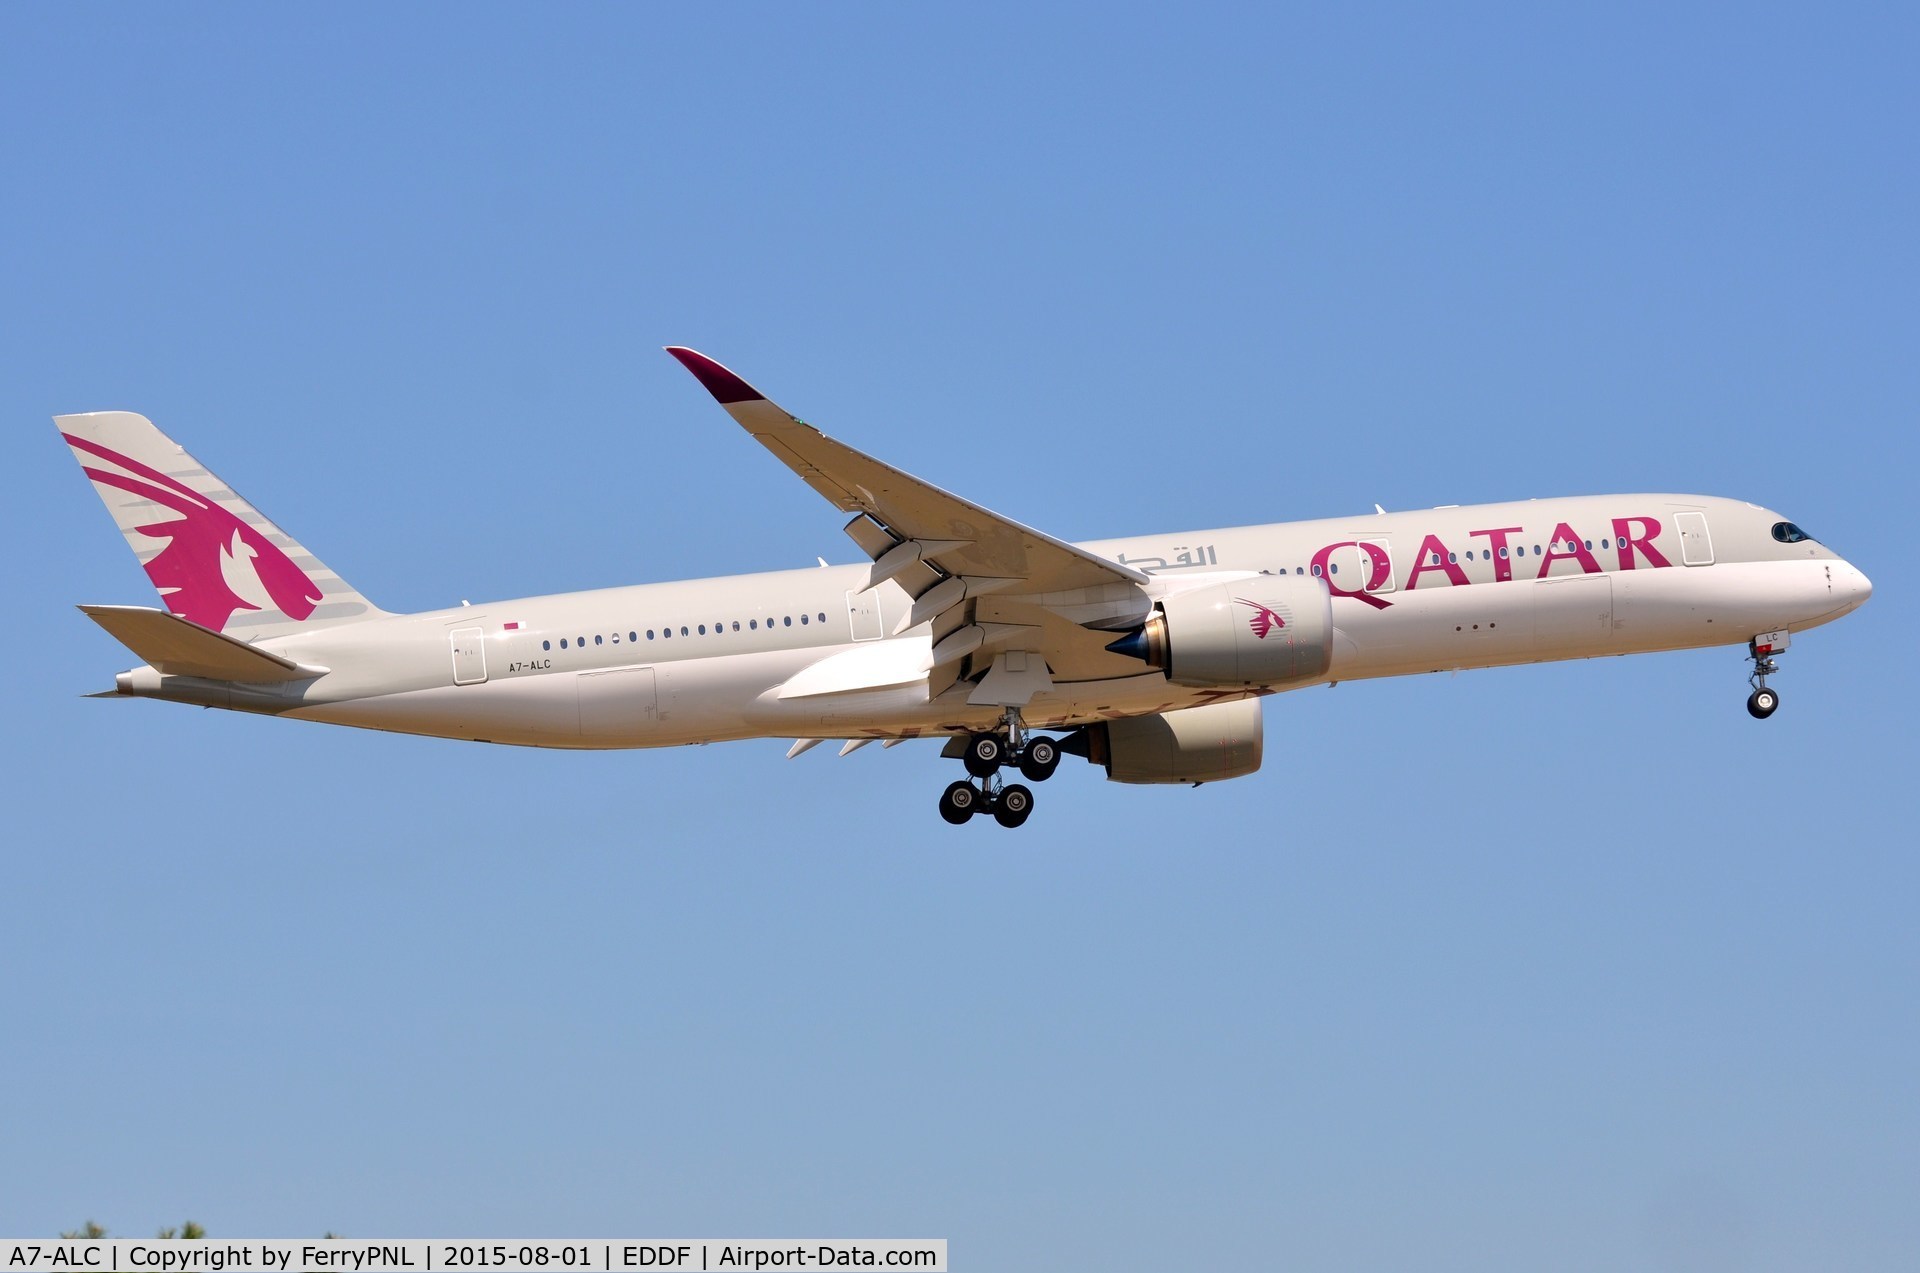 A7-ALC, 2015 Airbus A350-941 C/N 009, Qatar A359 was the highlight of the day.